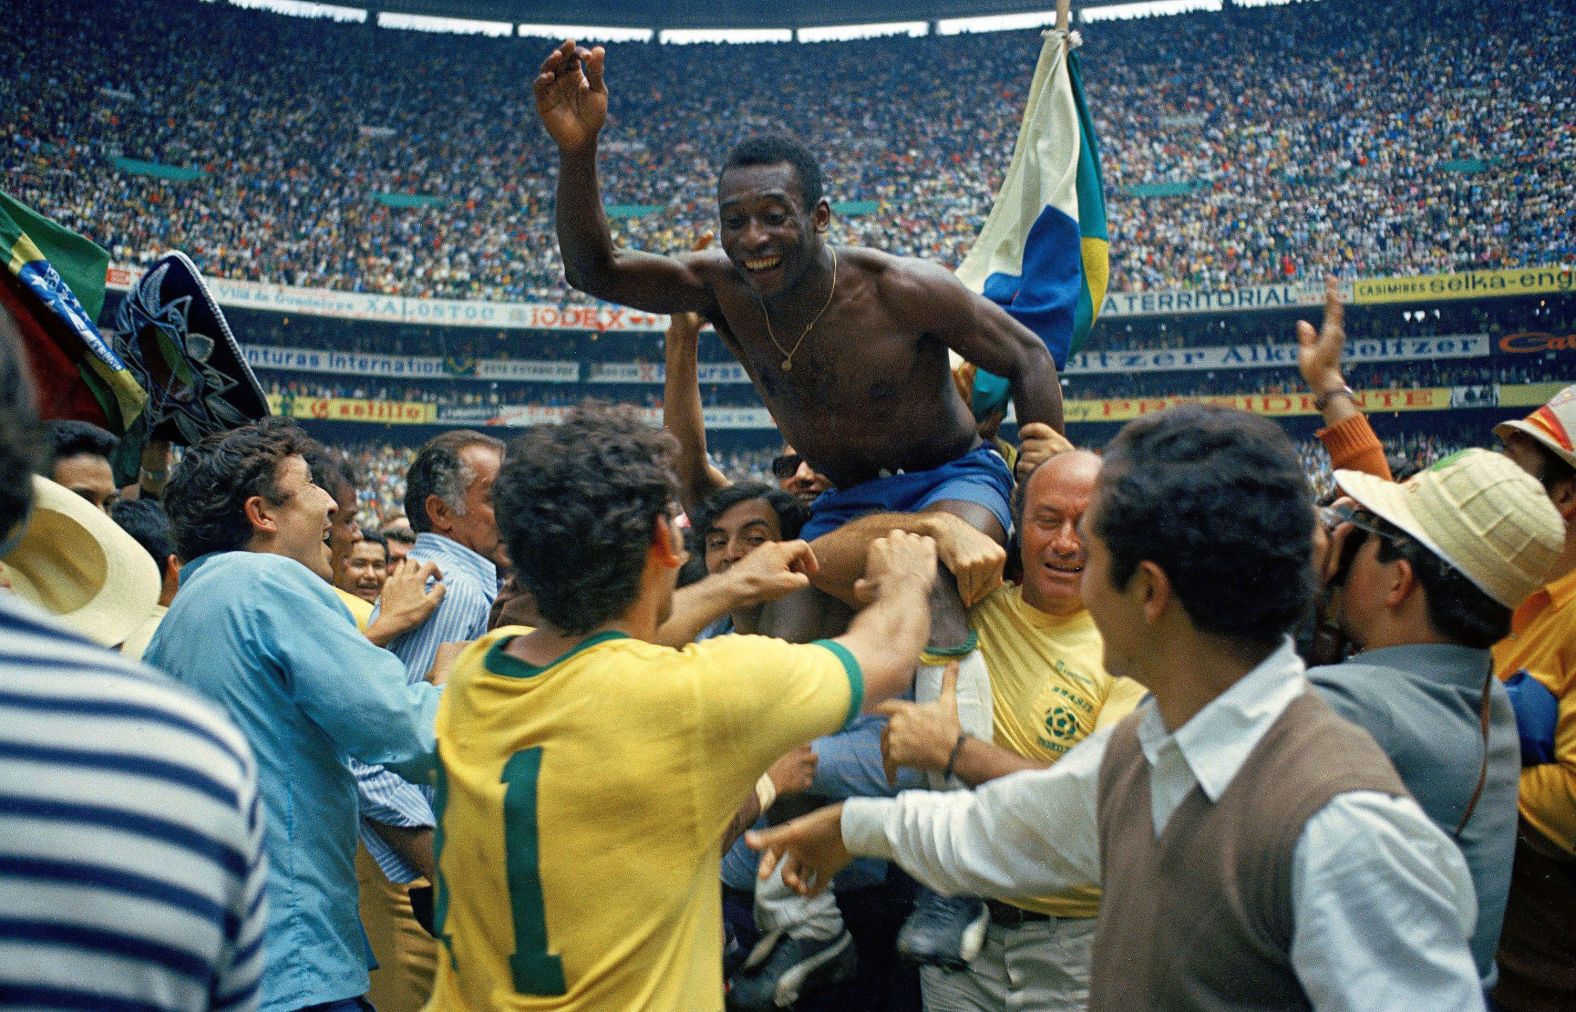 <a href="index.php?page=&url=https%3A%2F%2Fwww.cnn.com%2F2022%2F12%2F29%2Ffootball%2Fbrazil-pele-soccer-died-intl-latam-spt%2Findex.html" target="_blank">Pelé,</a> the Brazilian soccer legend who won three World Cups and became the sport's first global icon, died Thursday, December 29, at the age of 82.